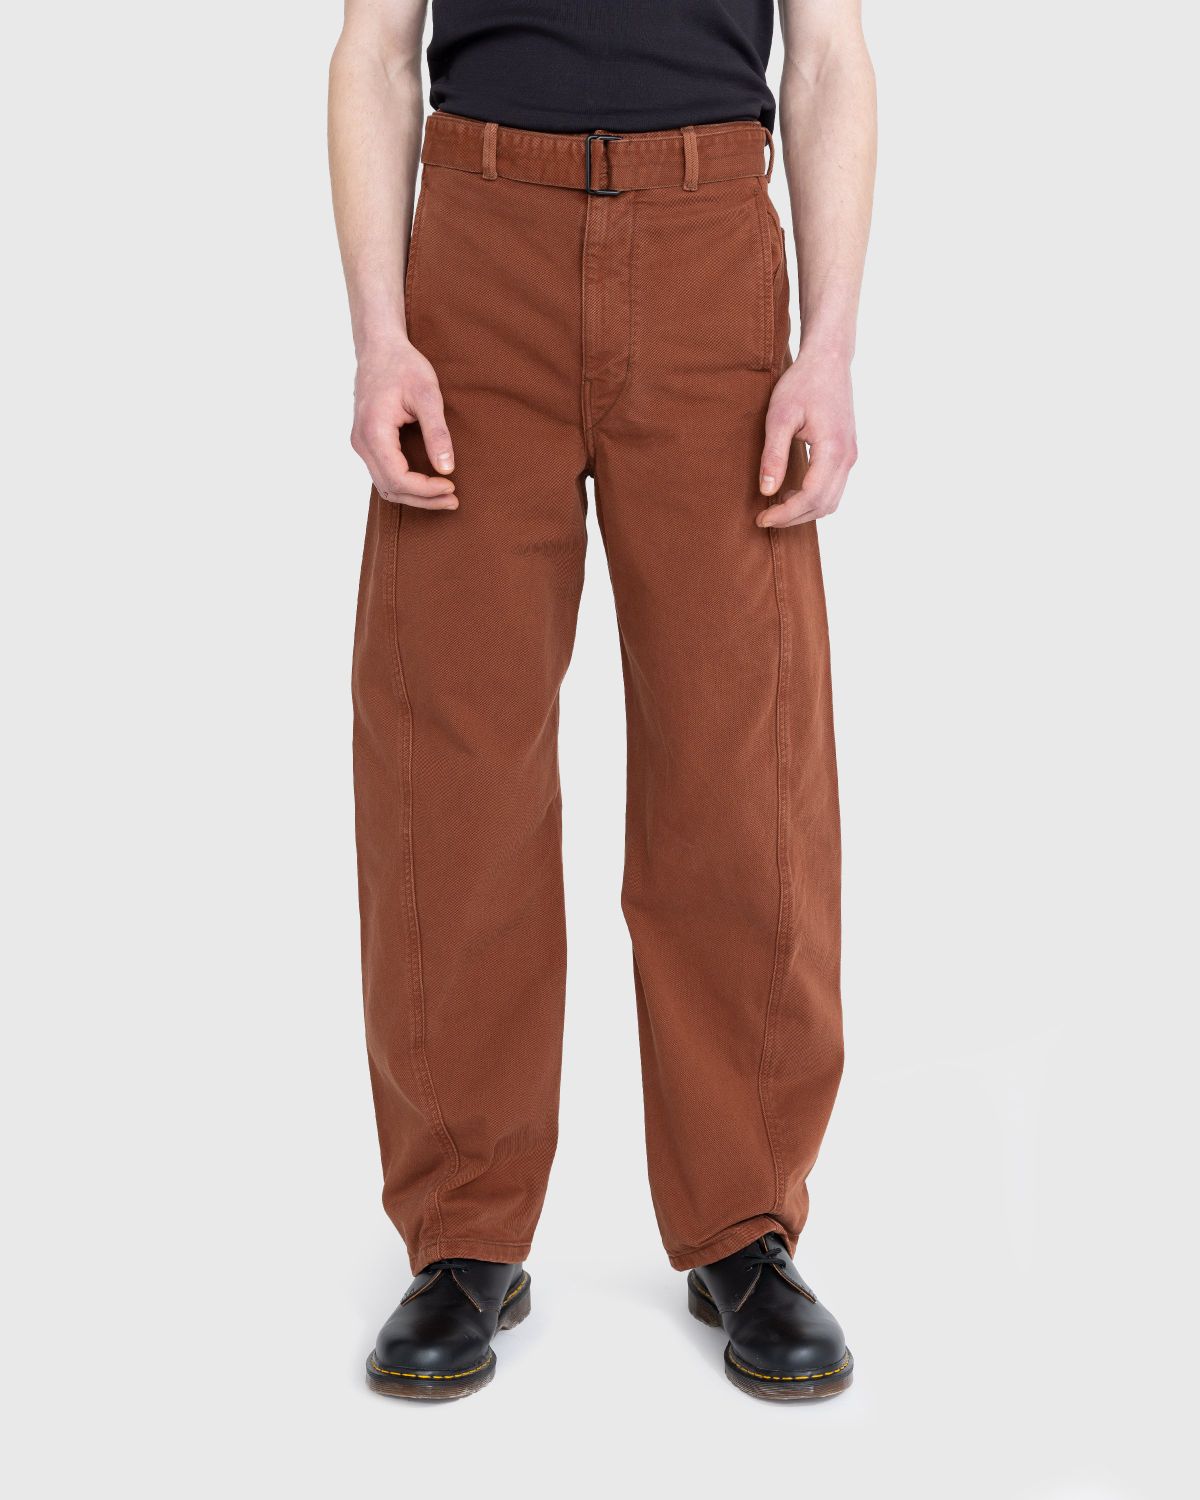 Lemaire – Twisted Belted Pants Brown - Trousers - Brown - Image 2